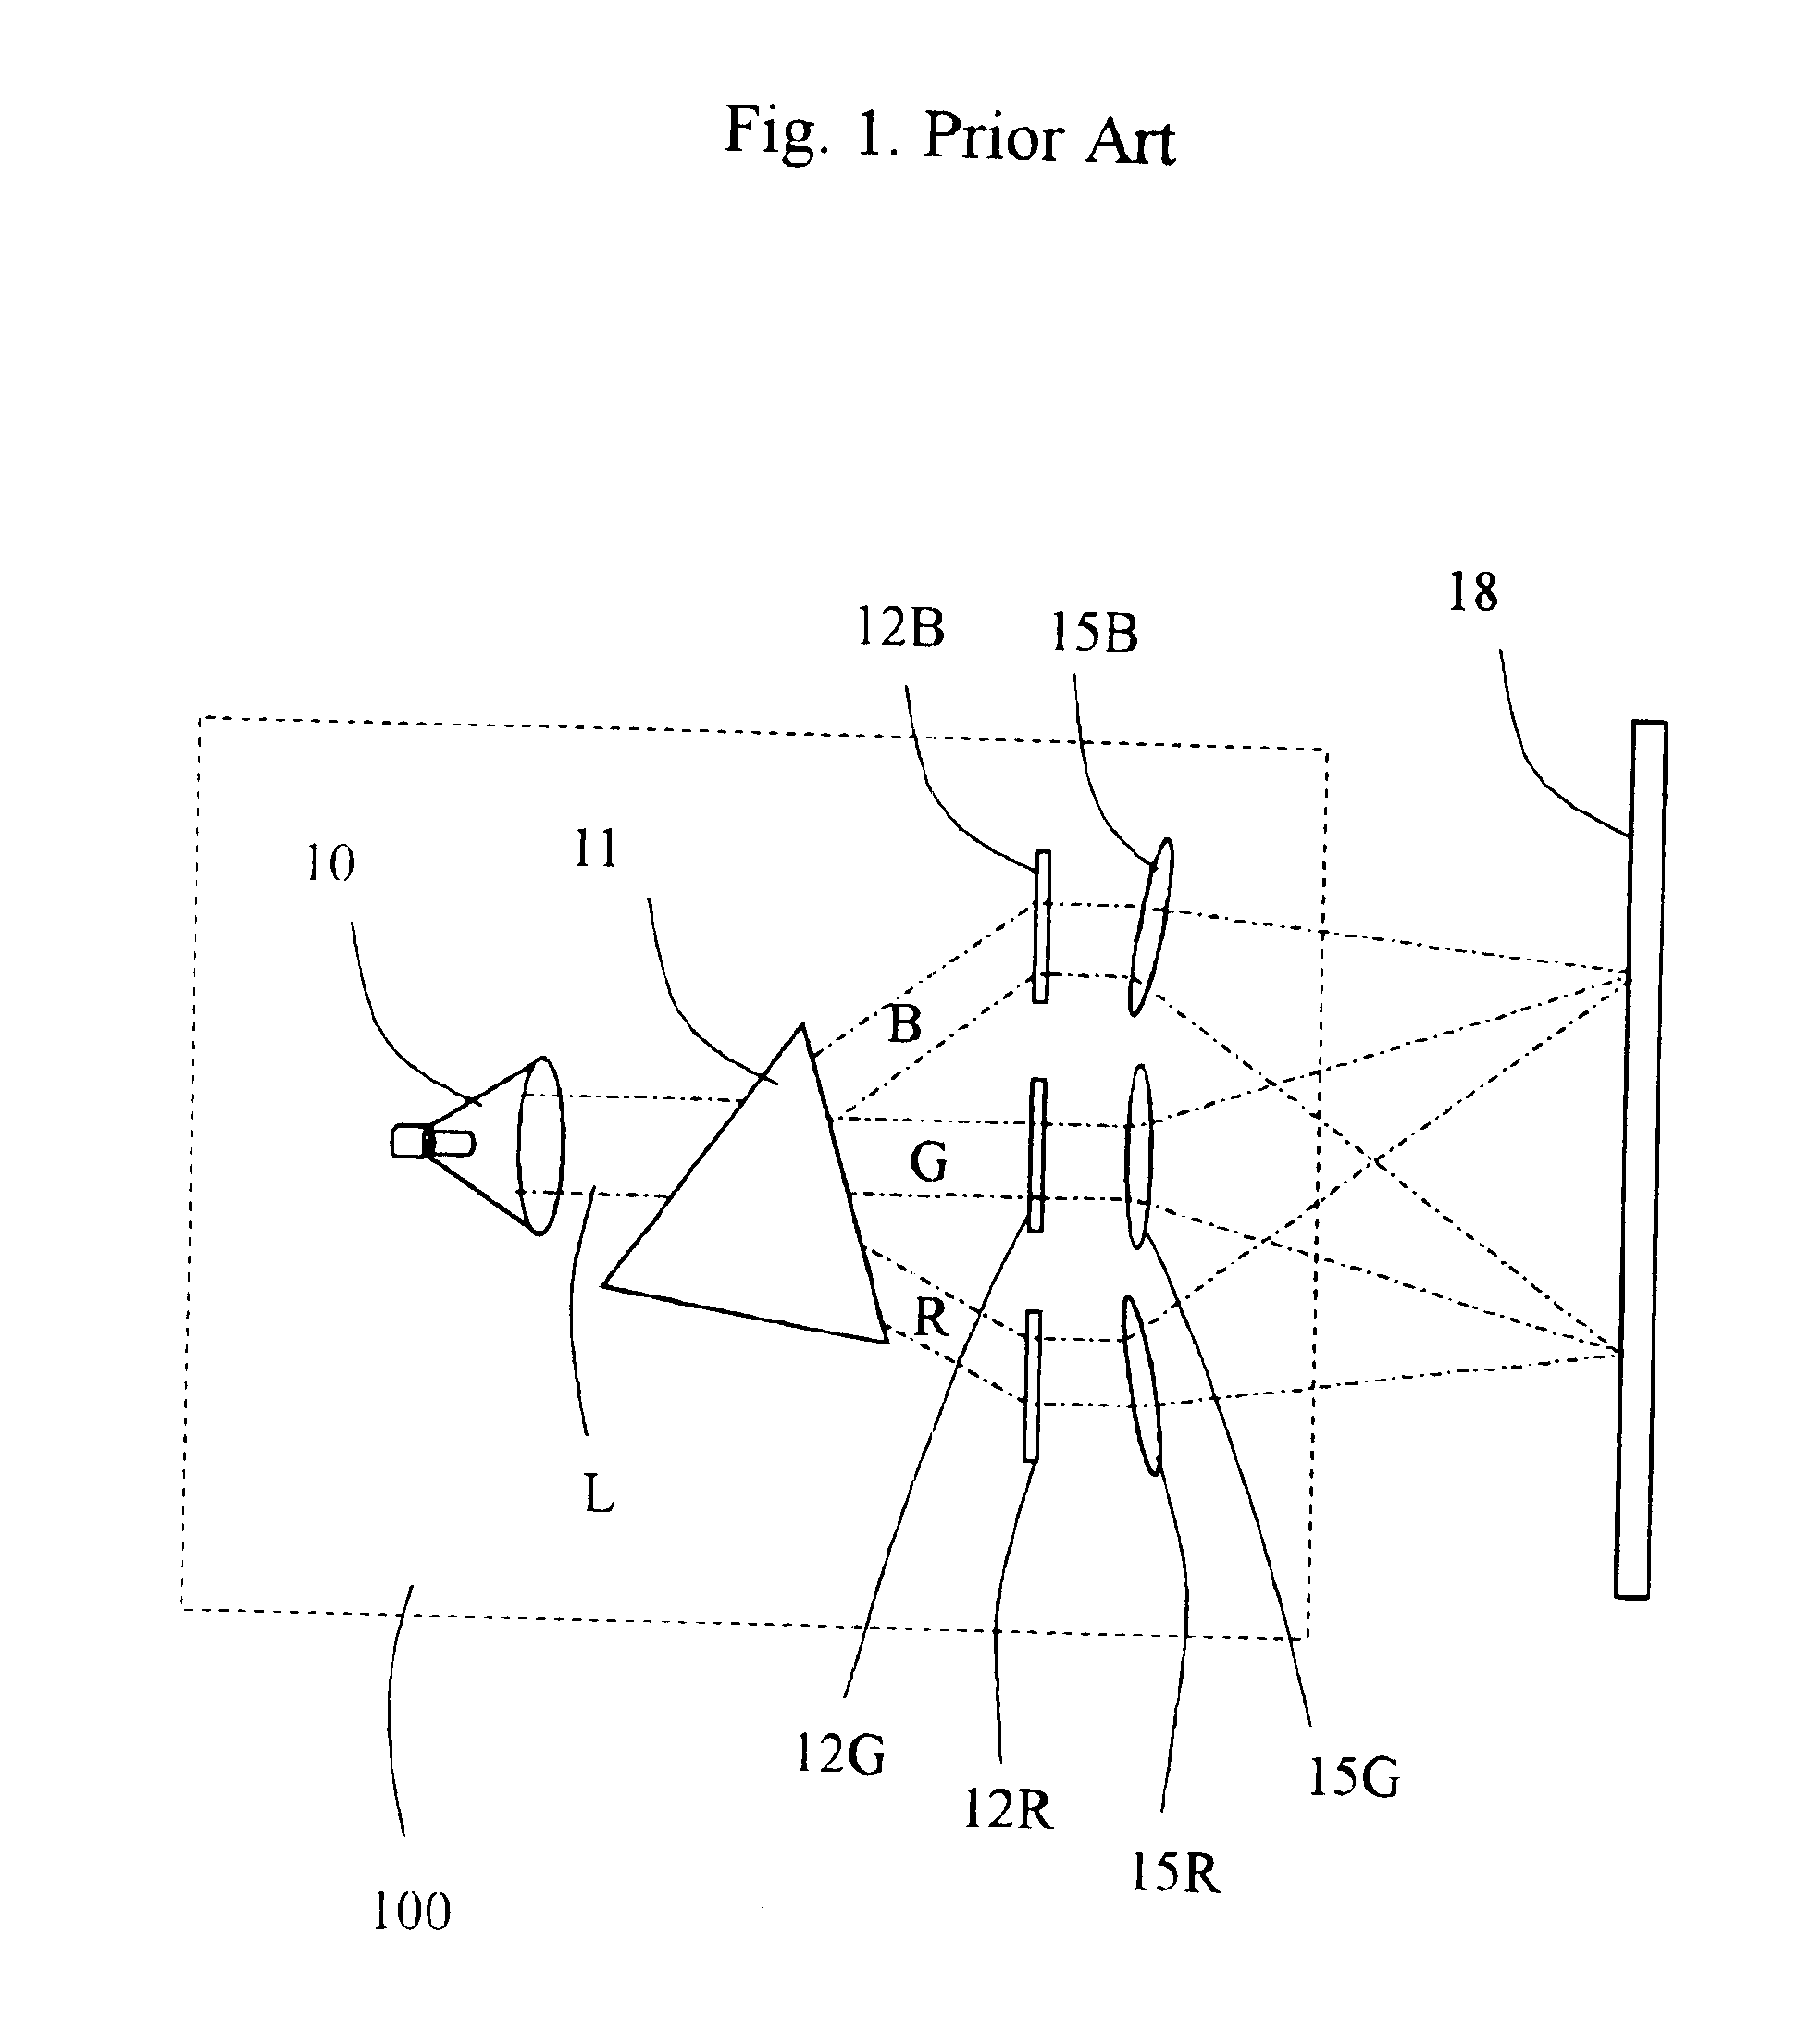 Projector with array LED matrix light source